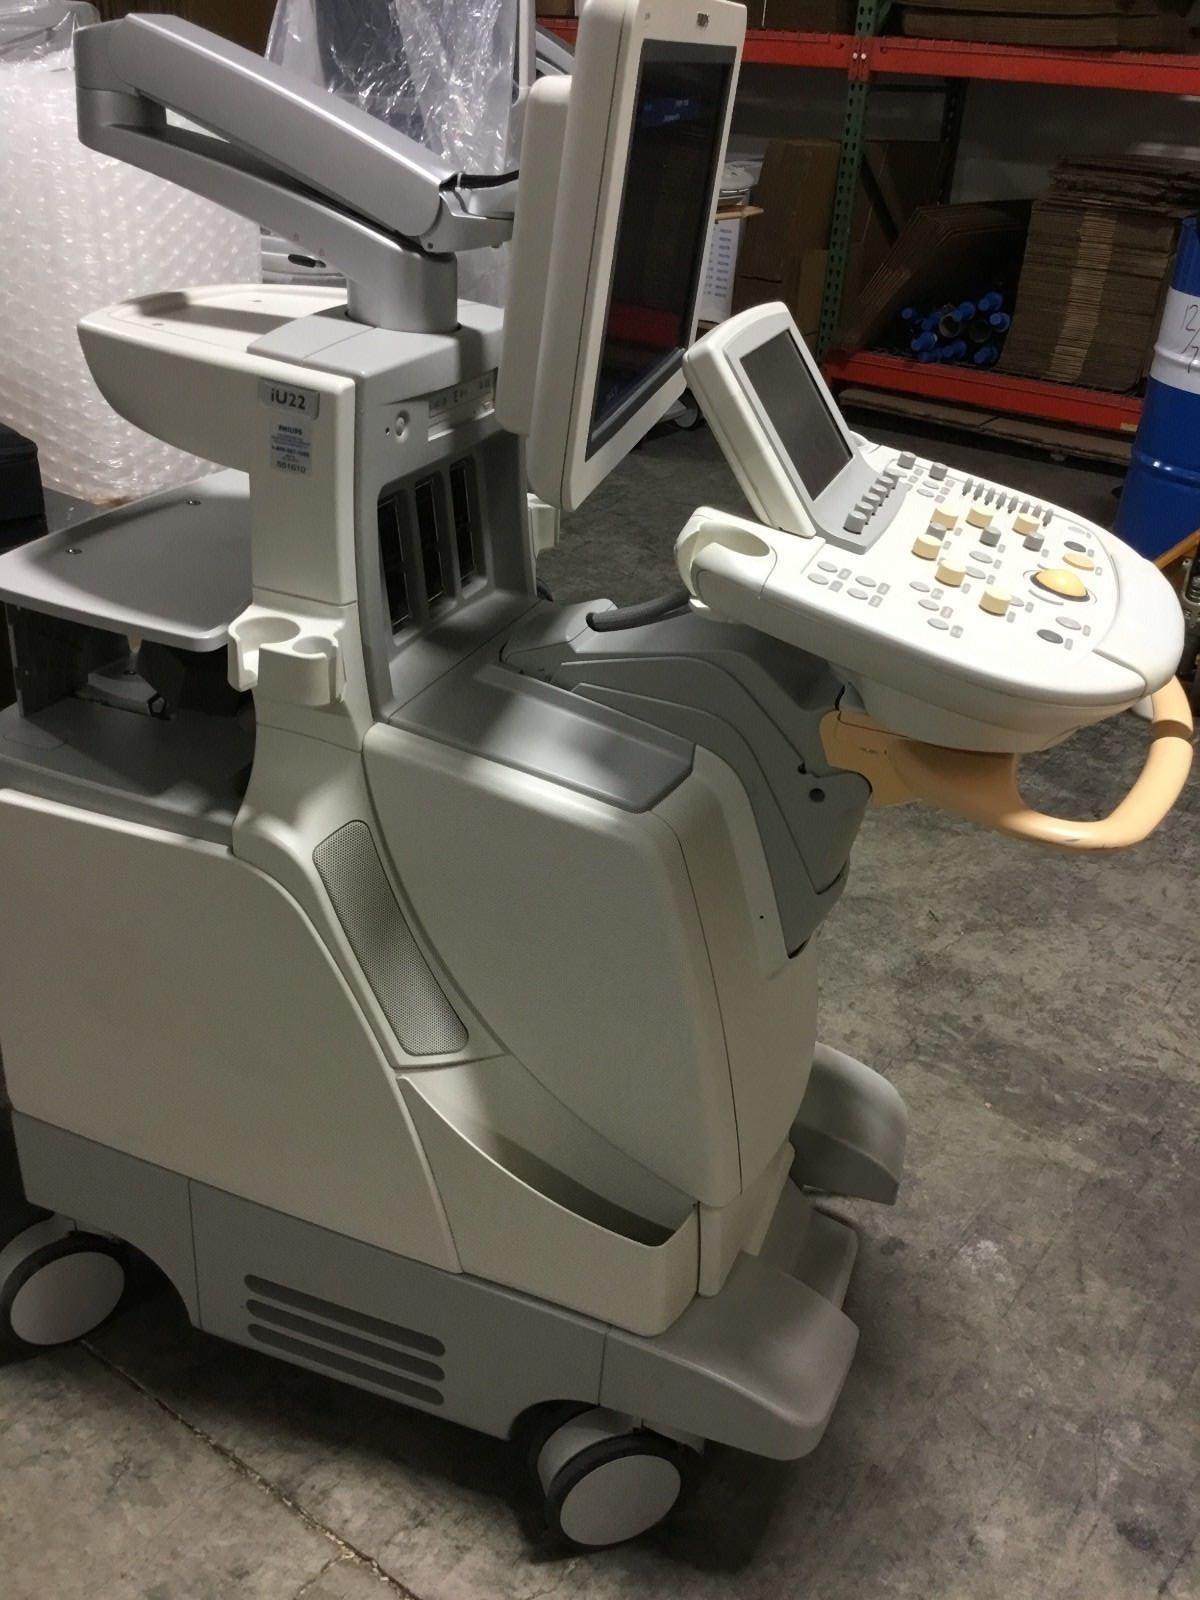 a medical device sitting on top of a dolly